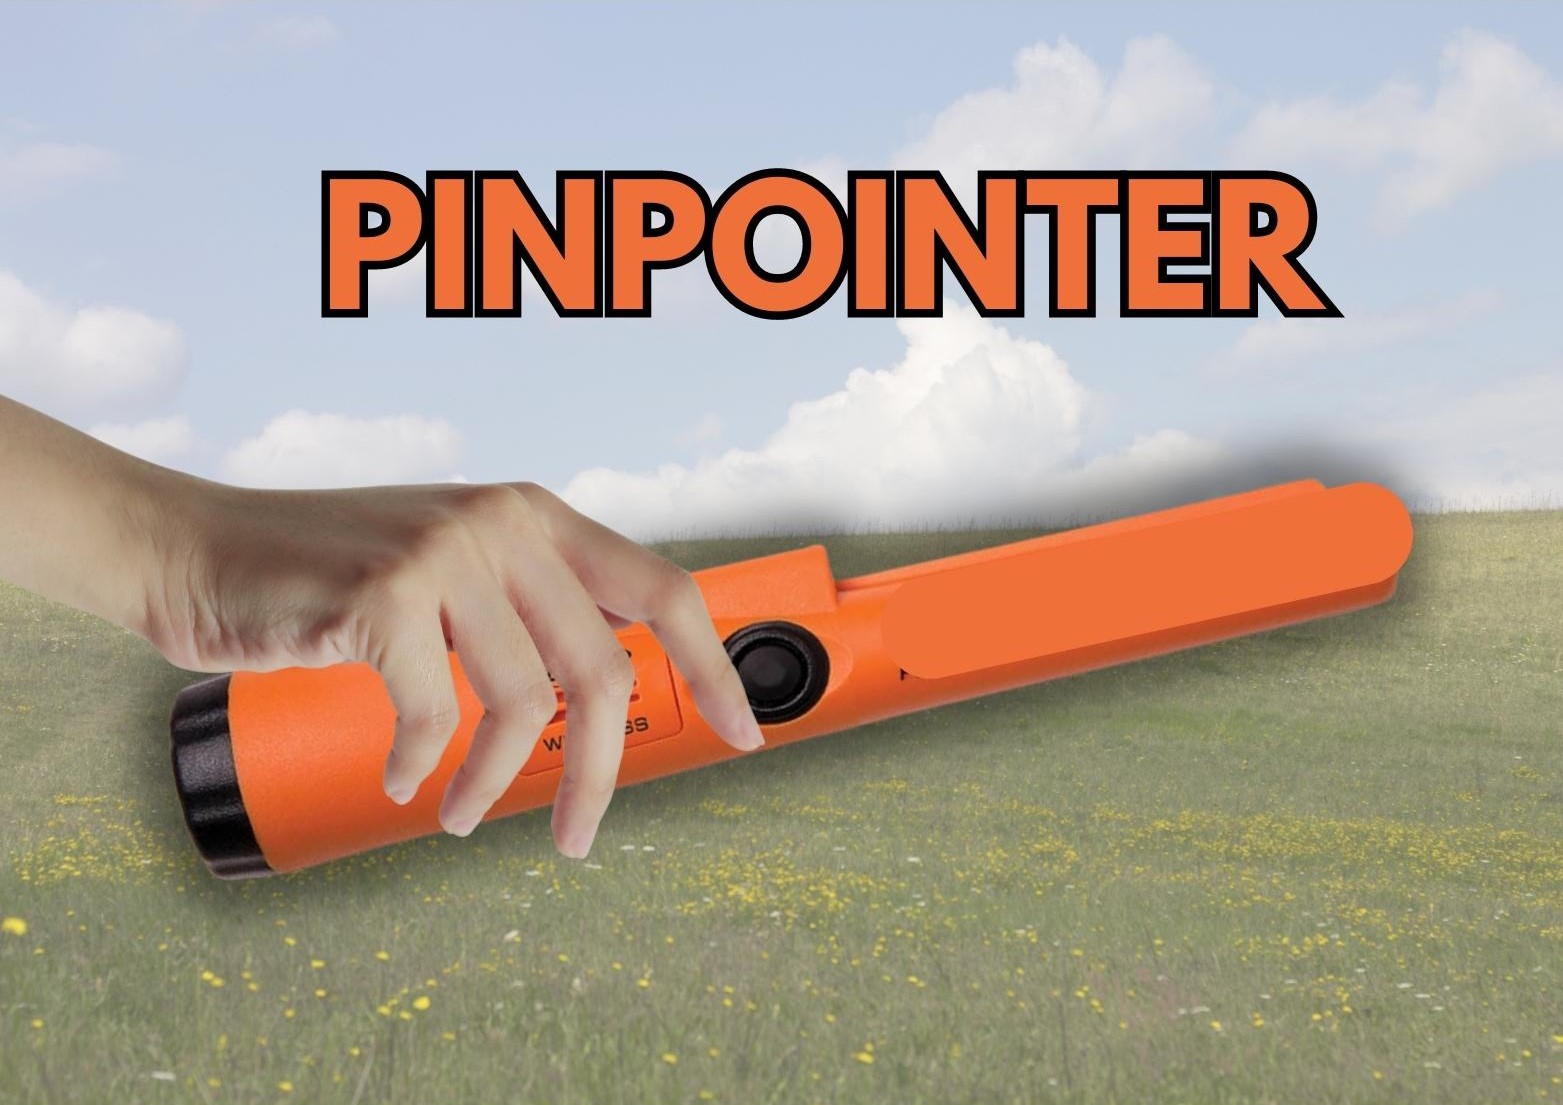 What is a pinpointer and do I need one?